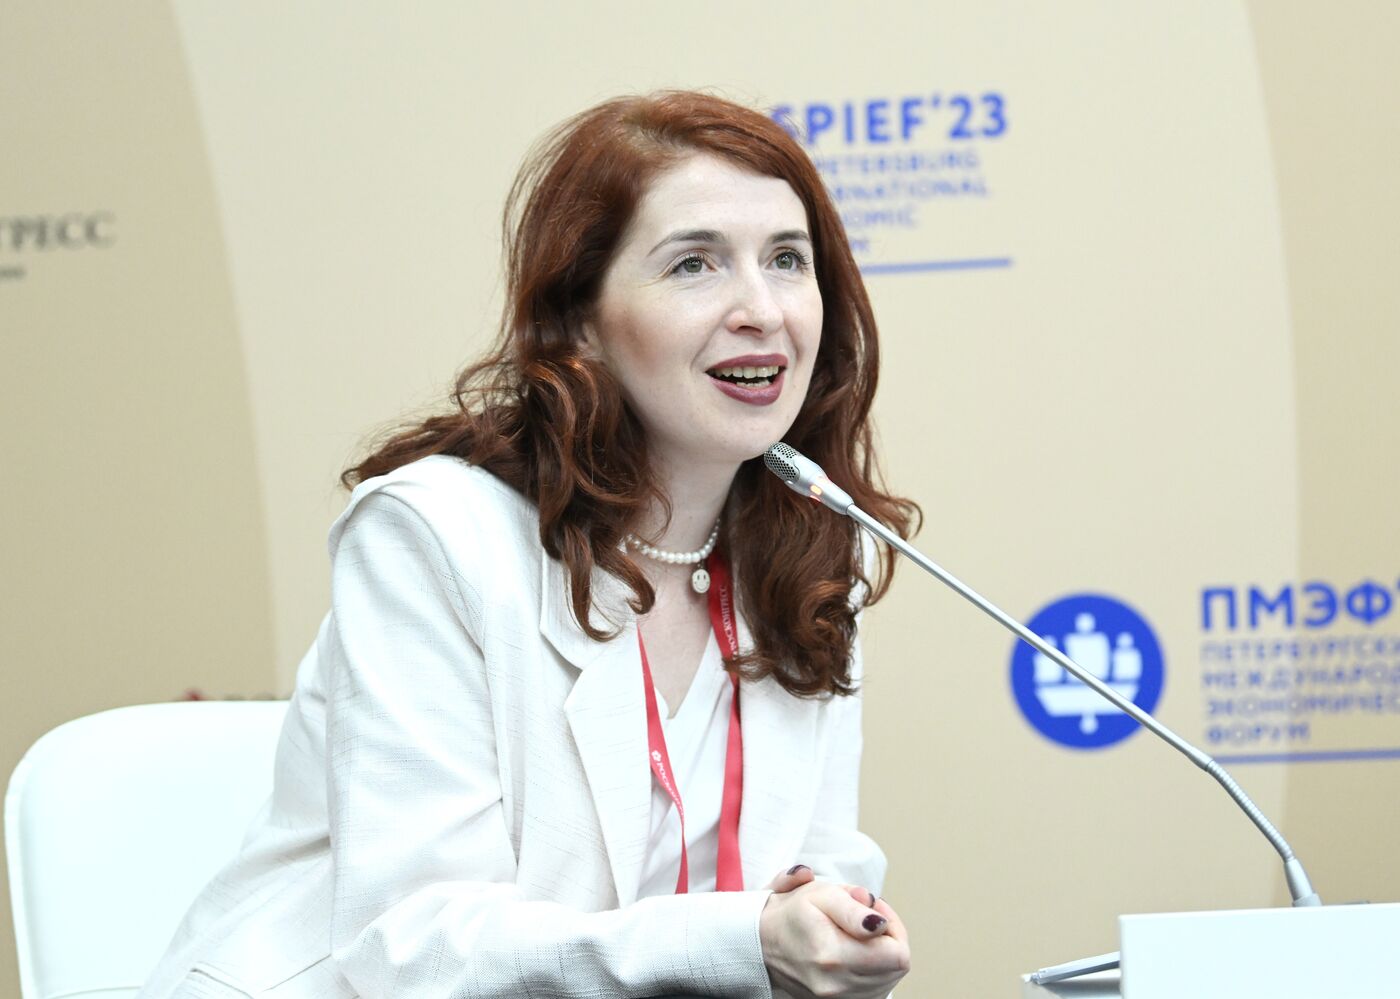 SPIEF-2023. In Search of Identity: From Traditional Folk Crafts to Innovative Brands